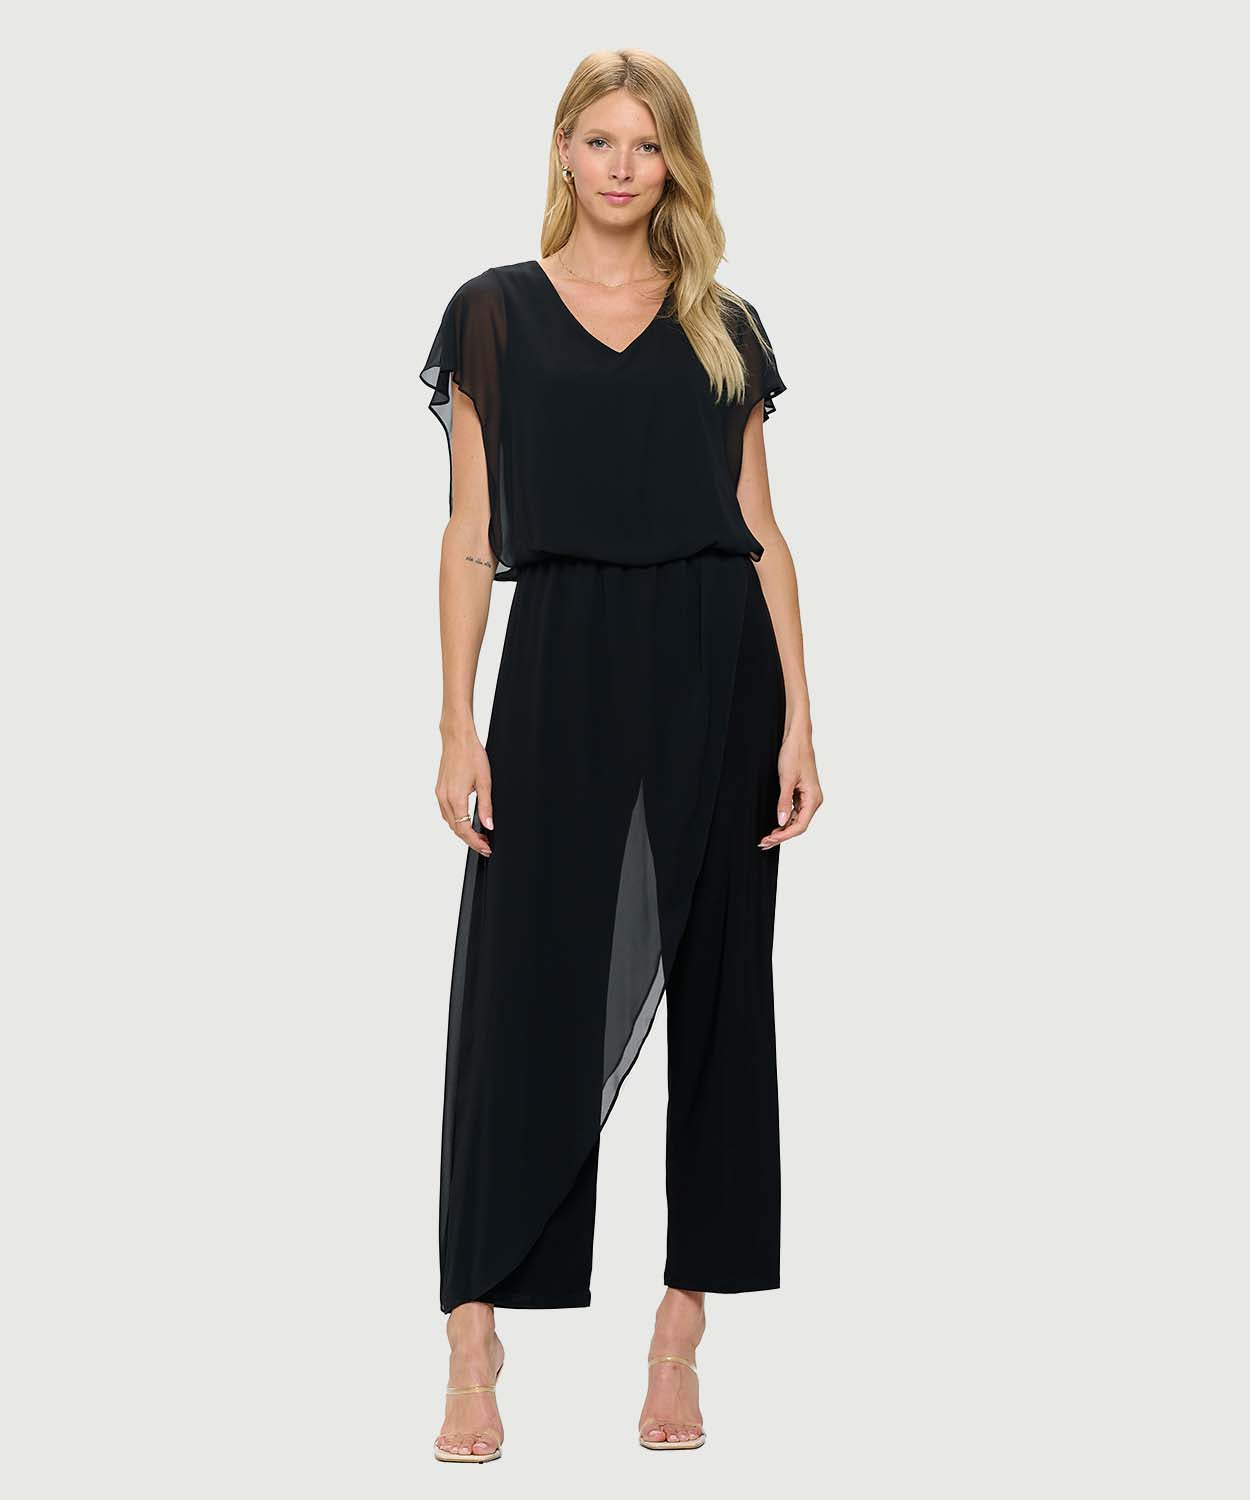 Buy Adrianna Papell Women's Knit Crepe & Chiffon Jumpsuit, Black, 14 at  Amazon.in